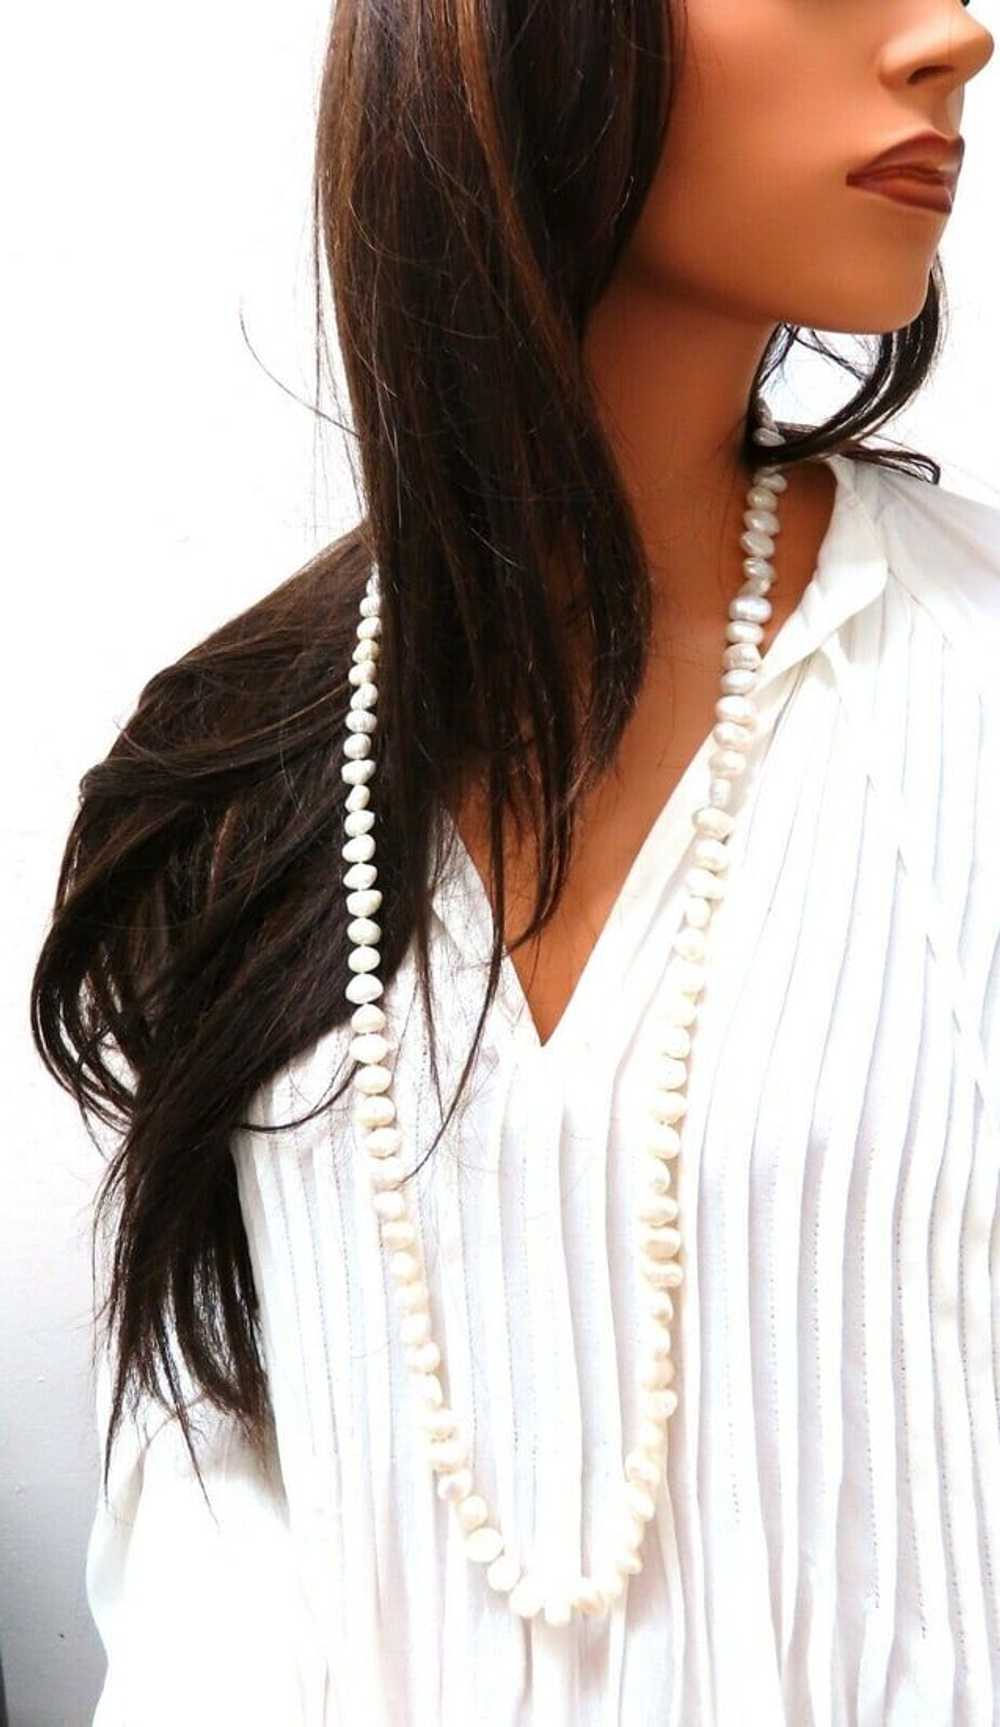 12mm Natural Freshwater Endless Necklace 36inch - image 4